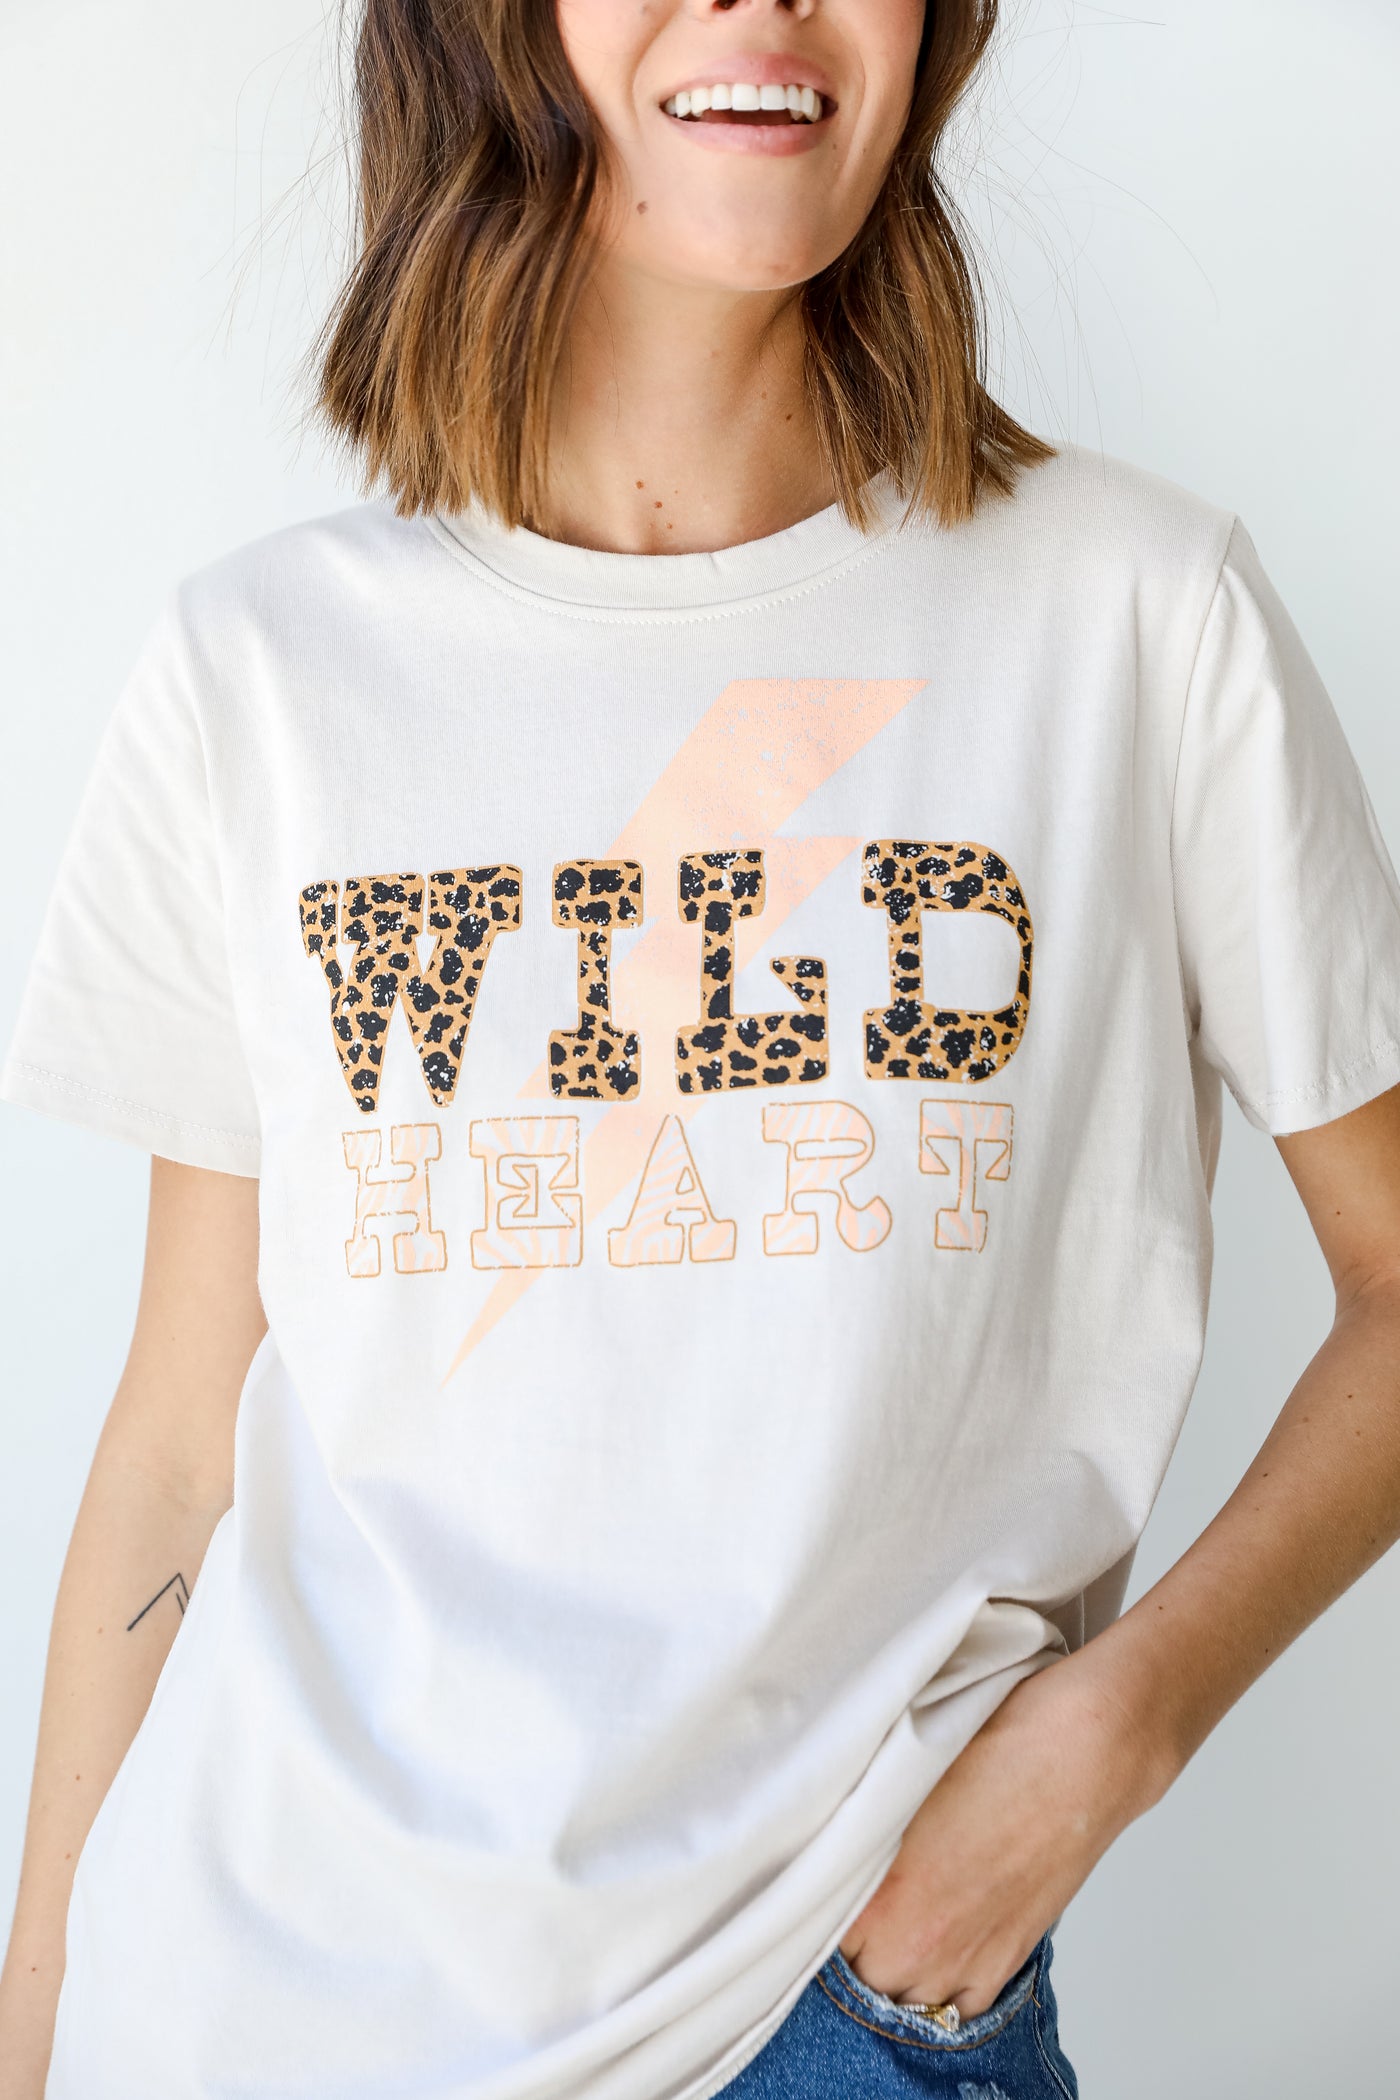 Wild Heart Graphic Tee from dress up